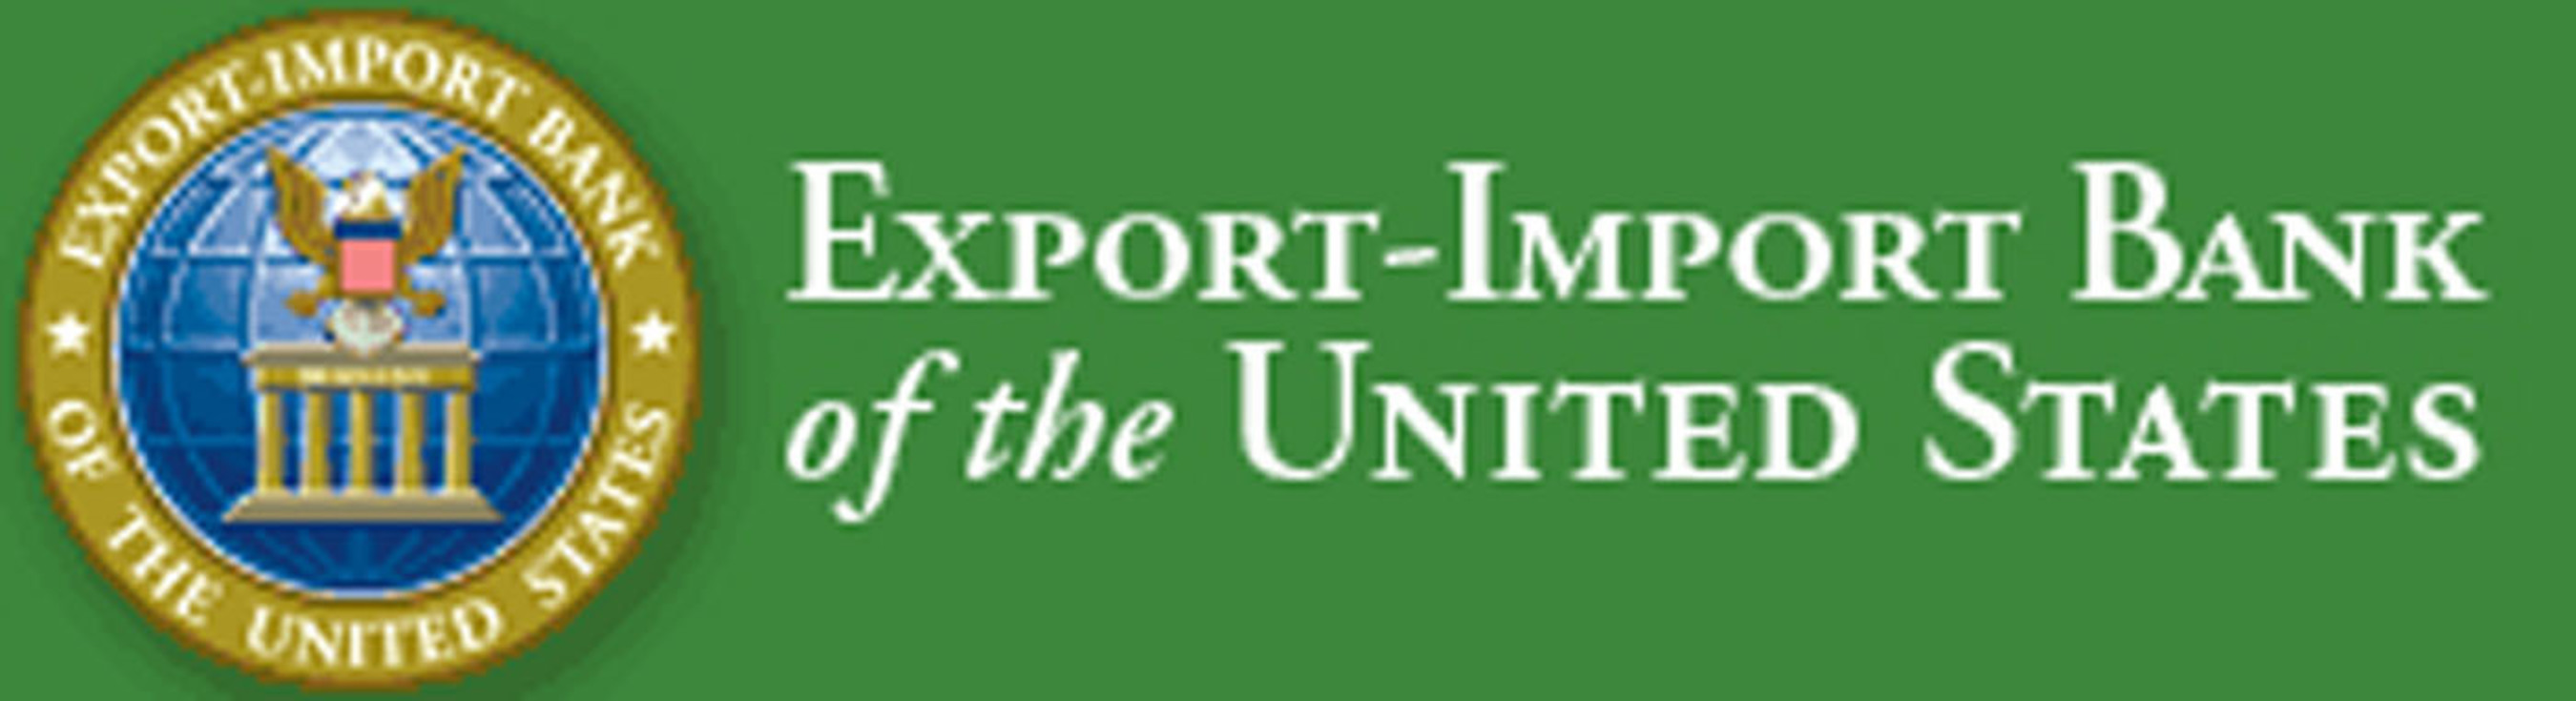 Export-Import Bank of the United States (Ex-Im Bank)